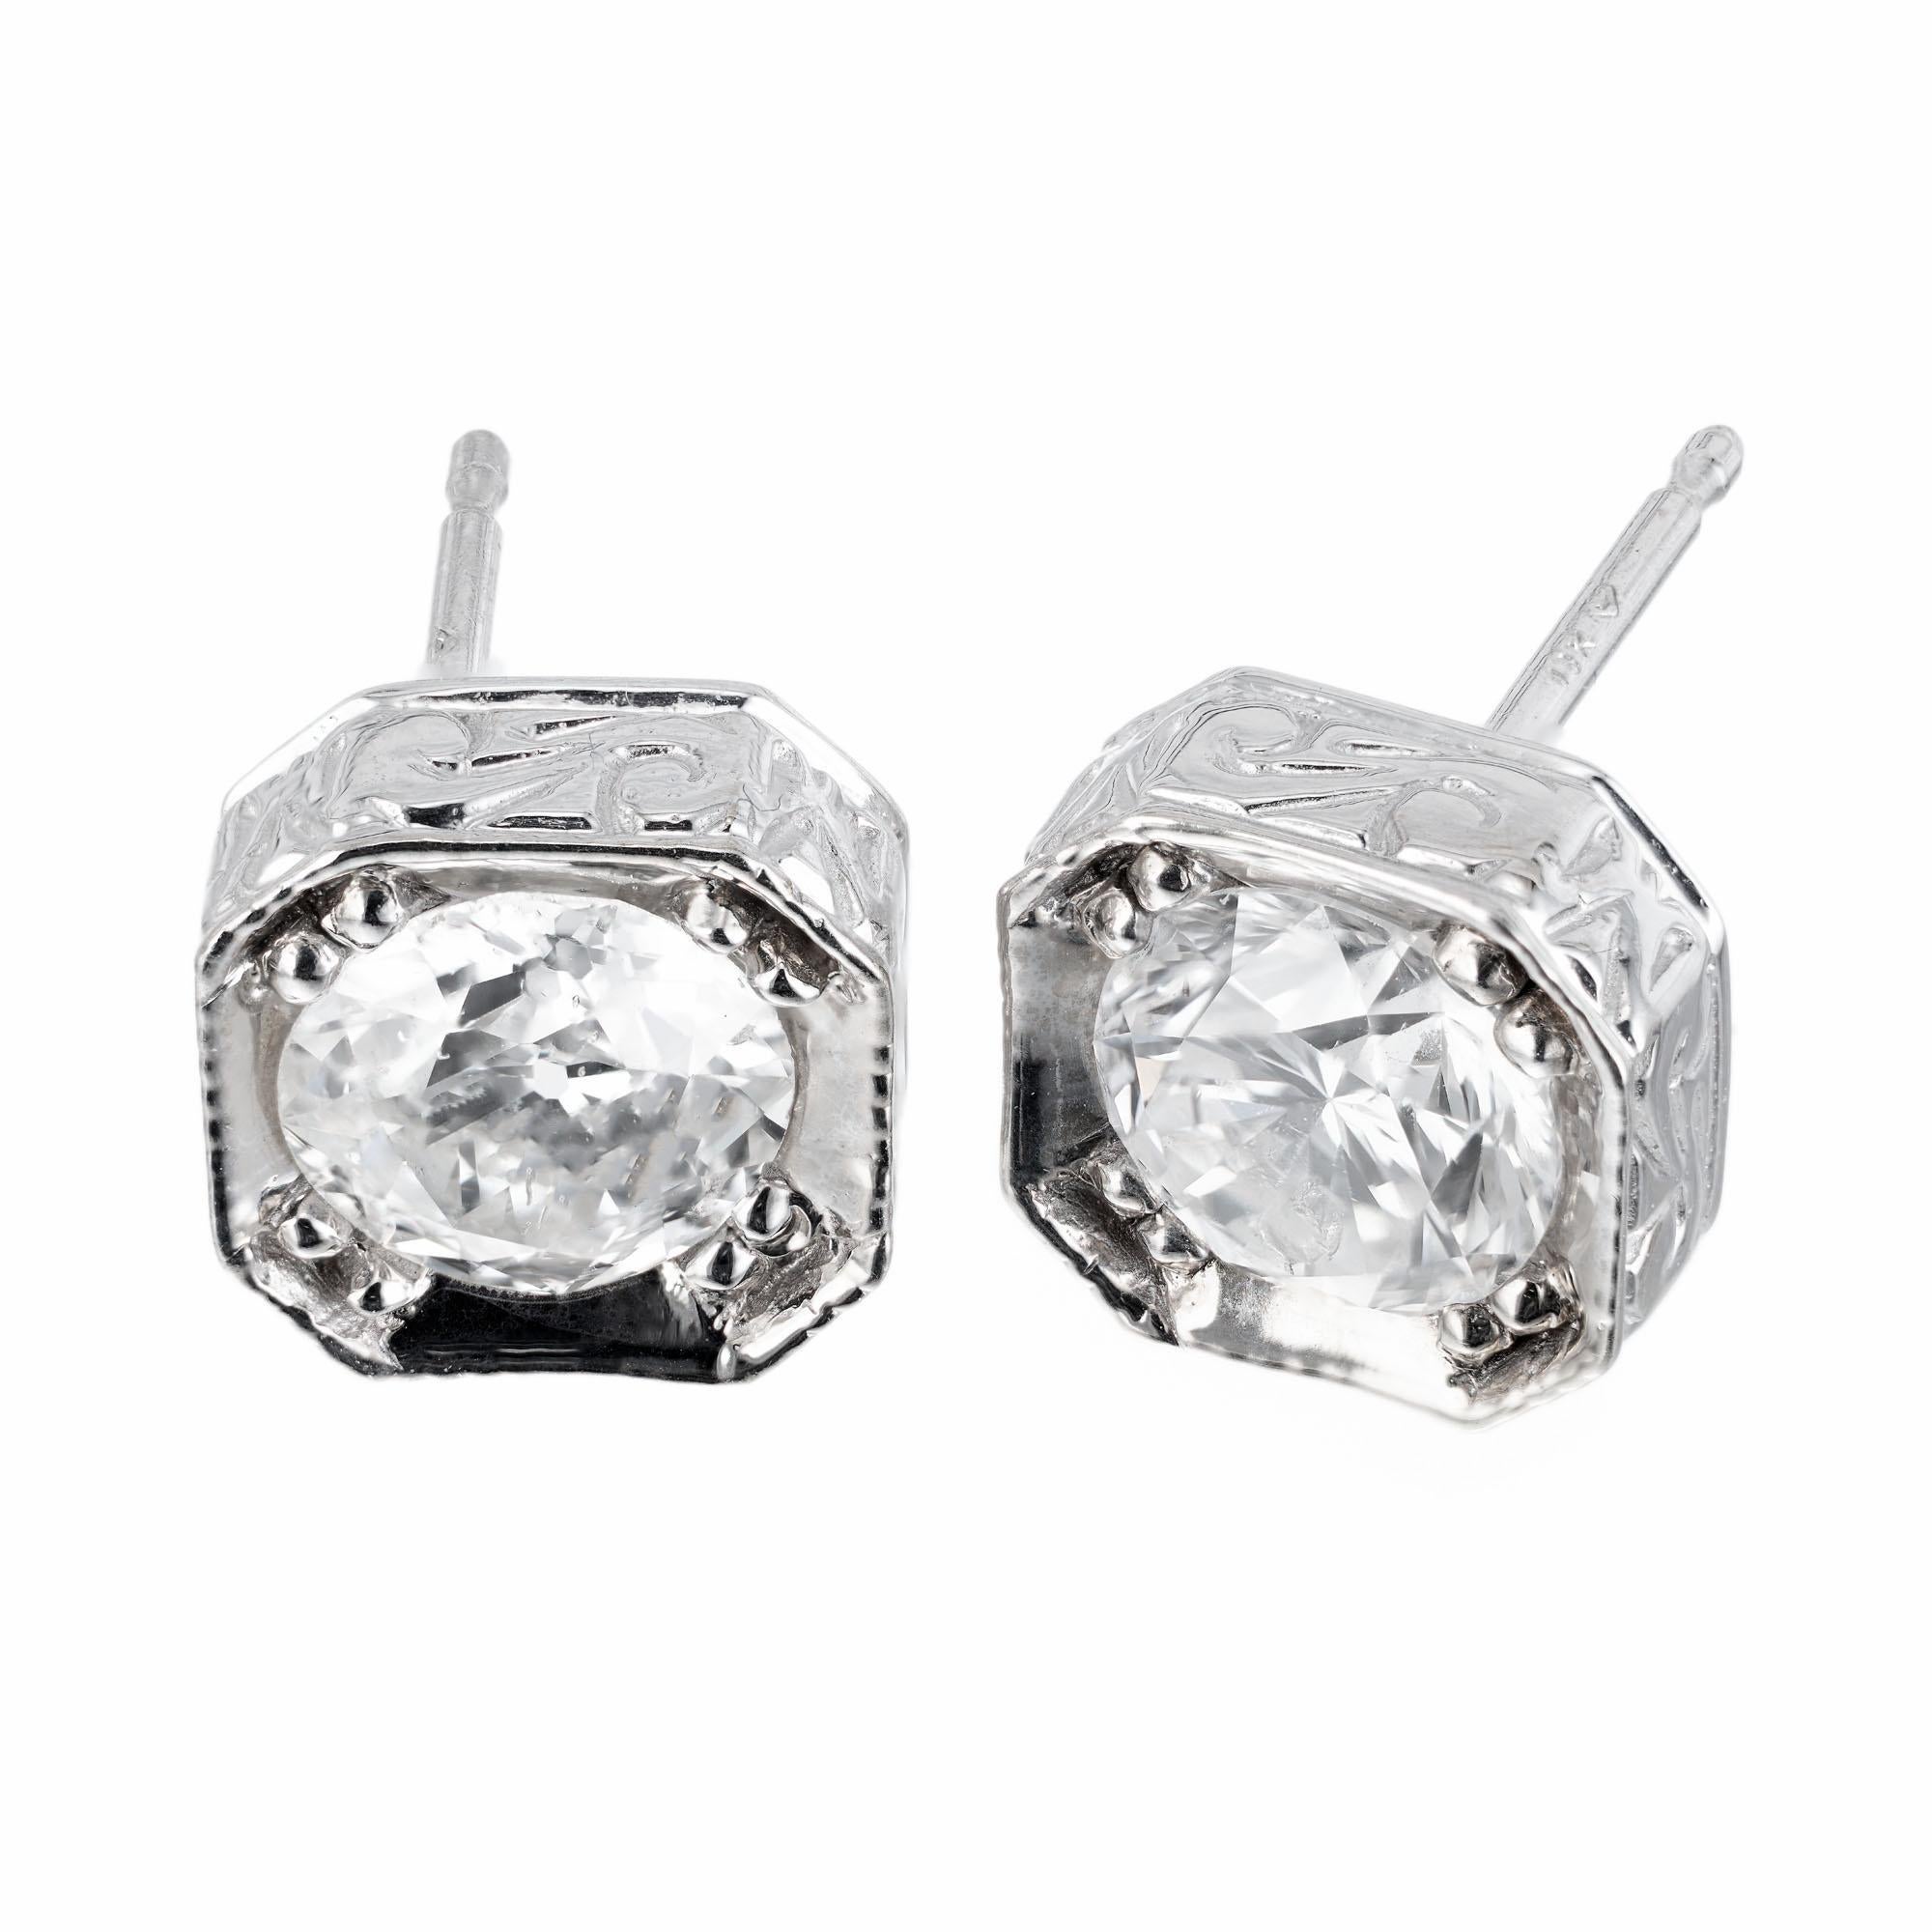 Round Cut Peter Suchy 1.22 Carat Diamond Antique Inspired Gold Stud Earrings